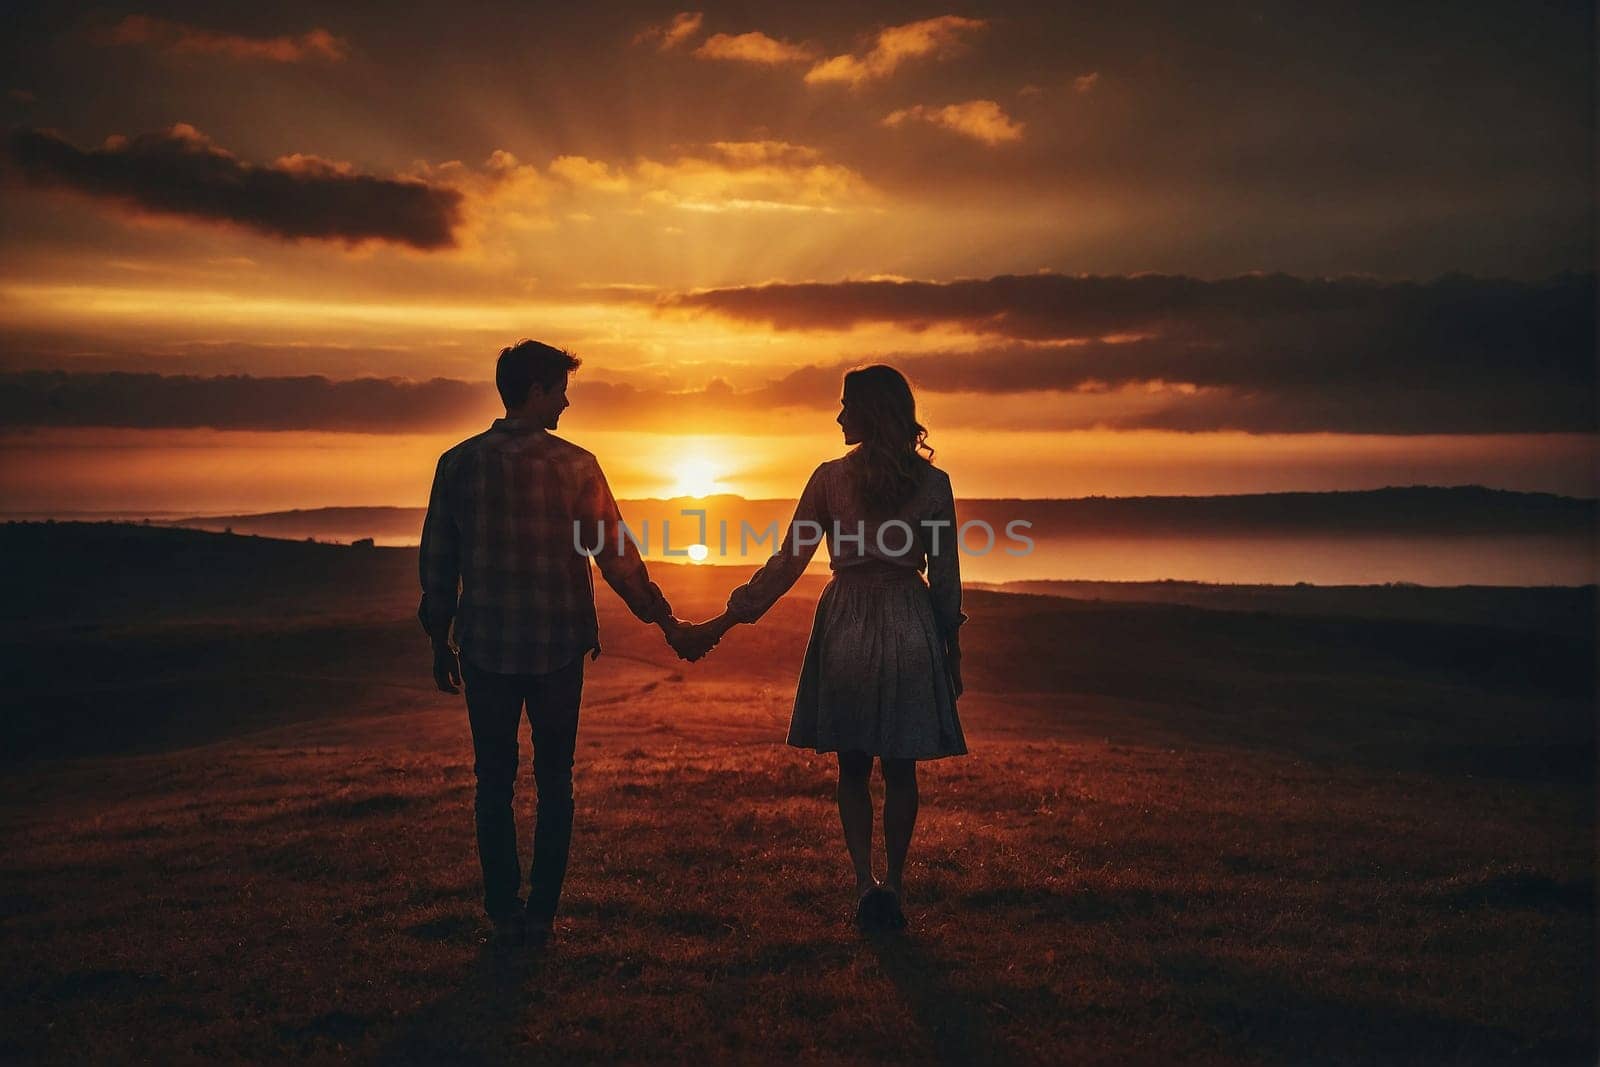 A couple stands side by side, holding hands as the sun sets behind them, creating a warm and romantic scene.